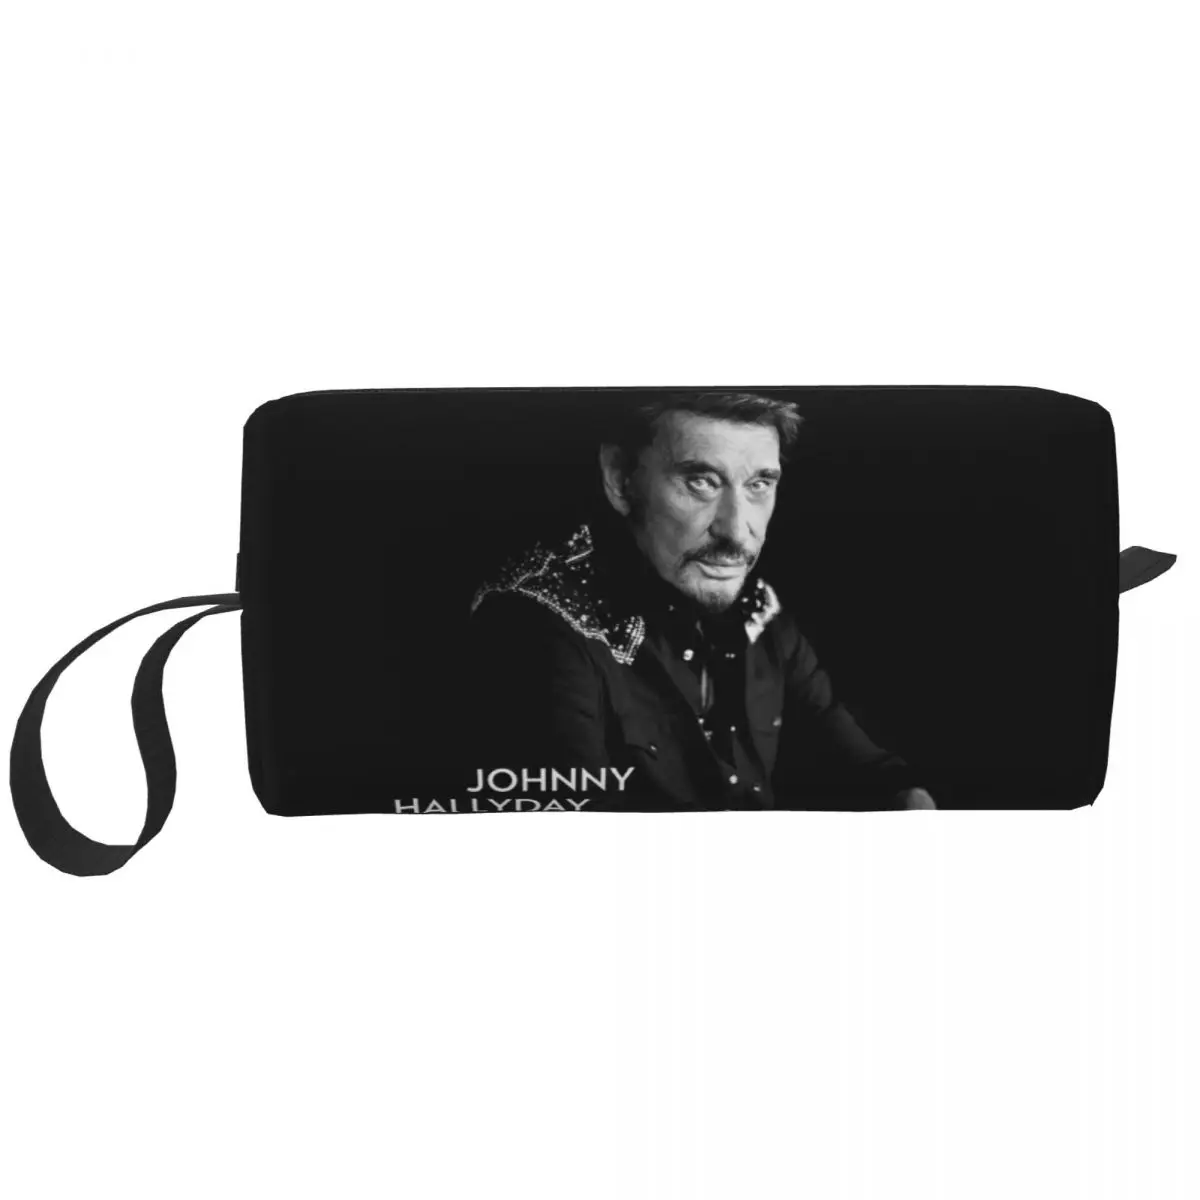 

Johnny Hallyday Makeup Bag Pouch Zipper Fashionable Cosmetic Bag Travel Toiletry Small Makeup Pouch Storage Bag Men Women